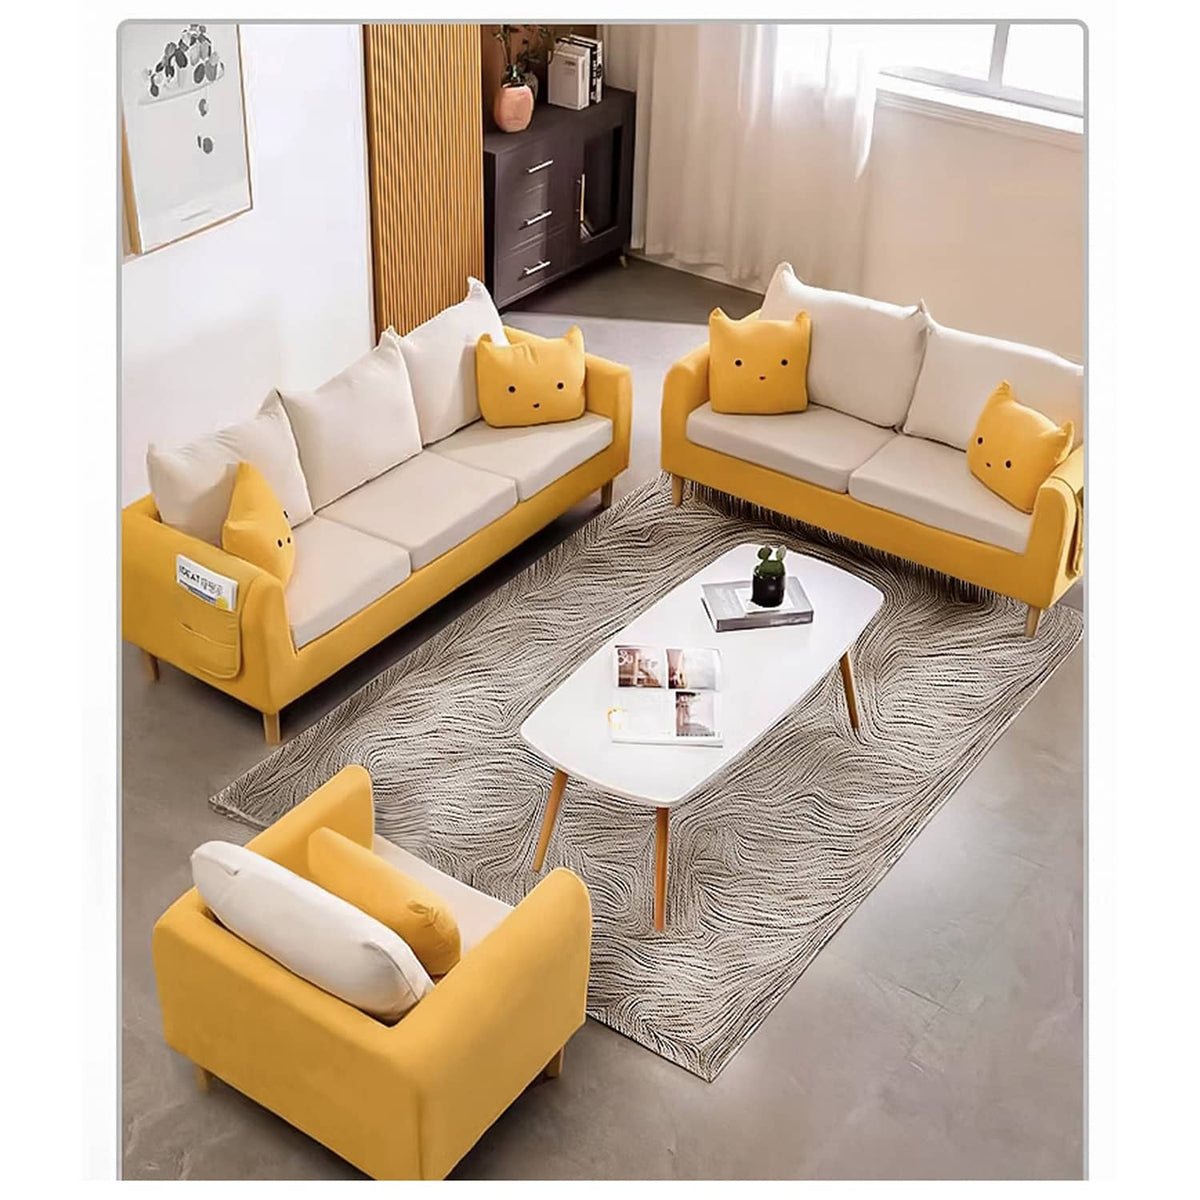 Stylish Cotton Blend Sofa in Vibrant Colors: Yellow, Off-White, Light Blue, Pink, Light Gray, and Grass Green with Wood Accents qm-12